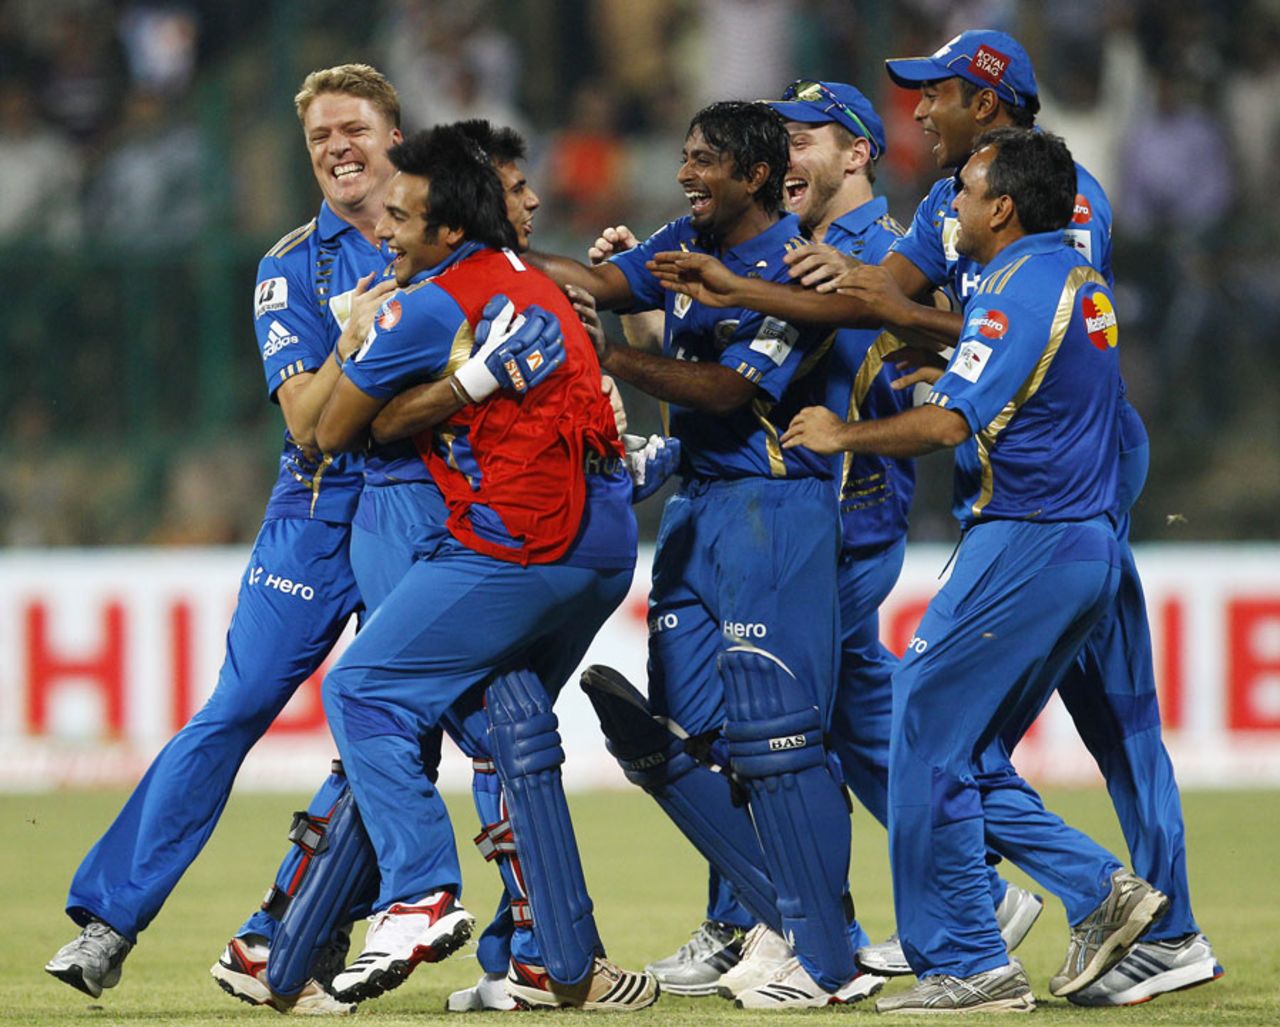 Mumbai Indians celebrate their one-wicket win over Trinidad & Tobago, Mumbai Indians v Trinidad & Tobago, Champions League T20, Bangalore, September 26, 2011